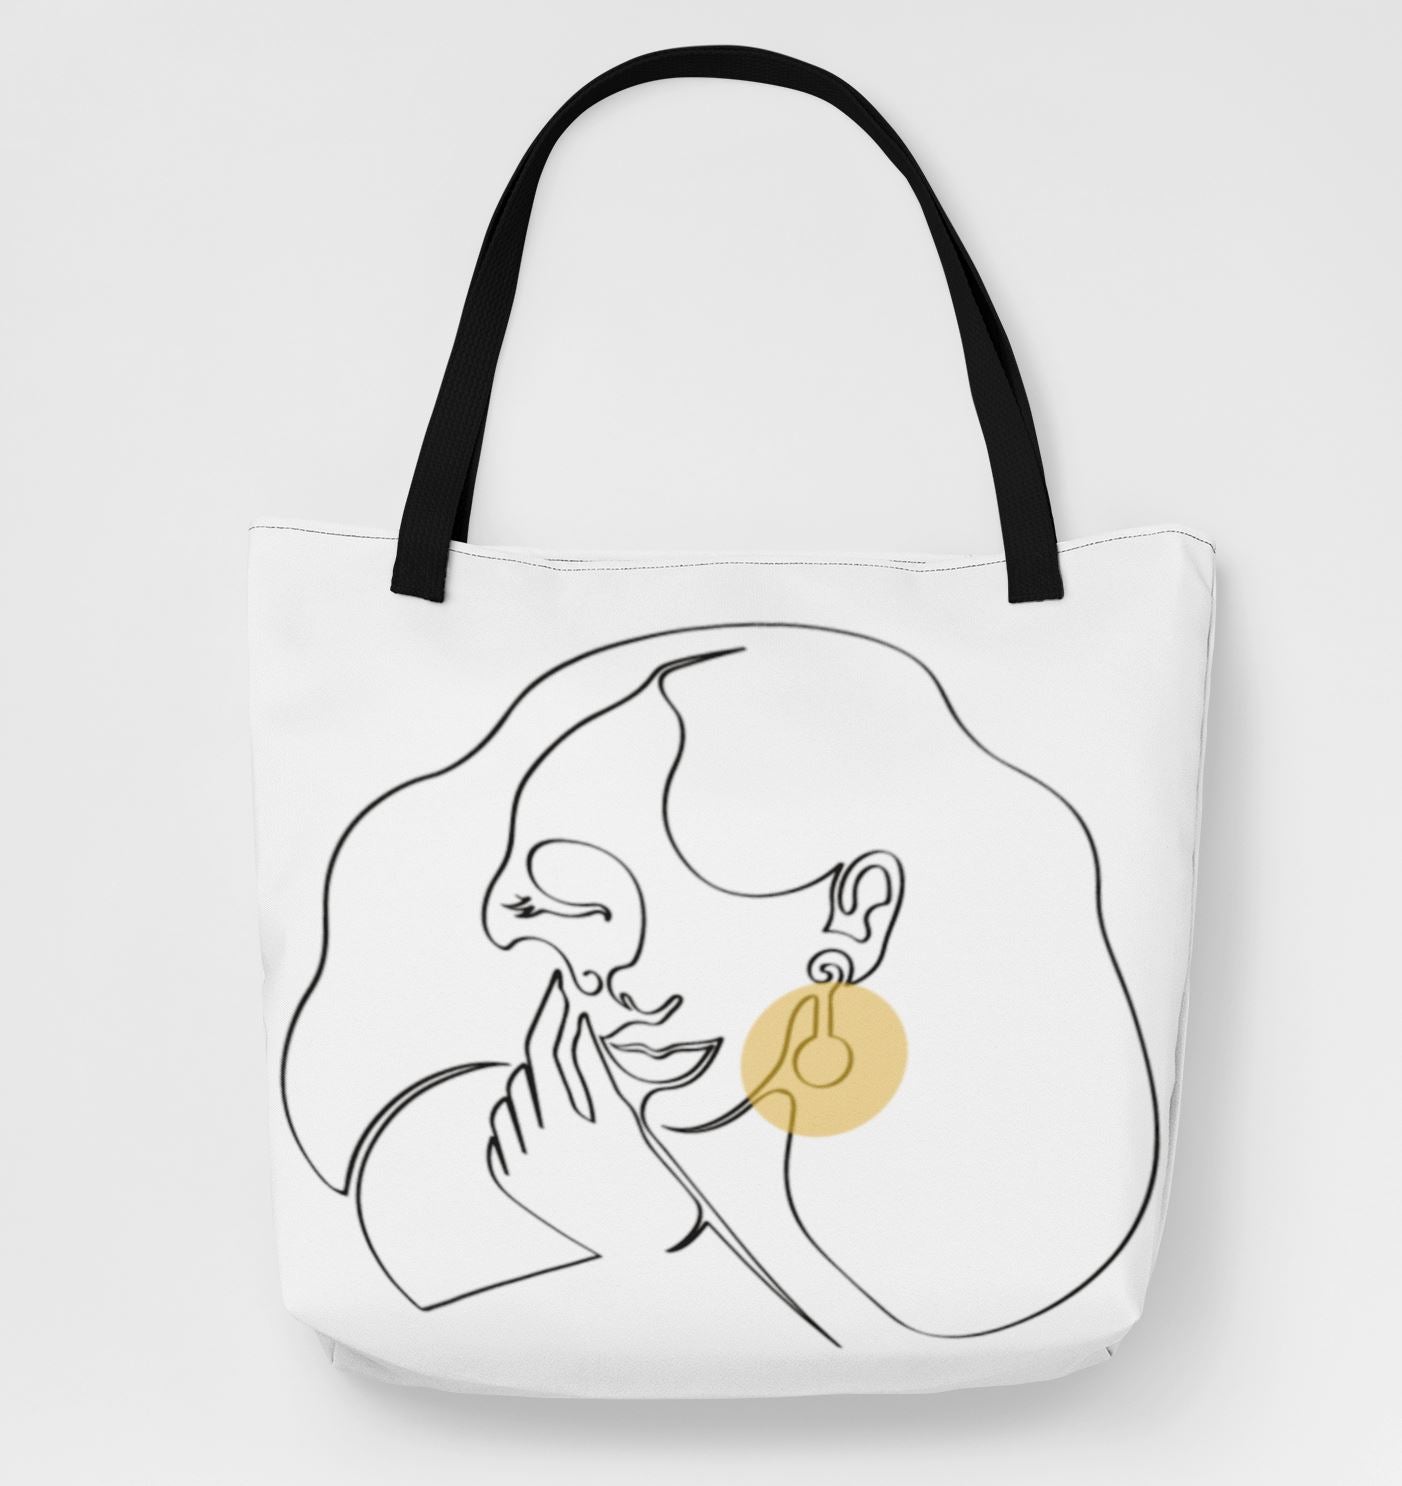 "Continuous" Tote Bag - Rene's Whimsies